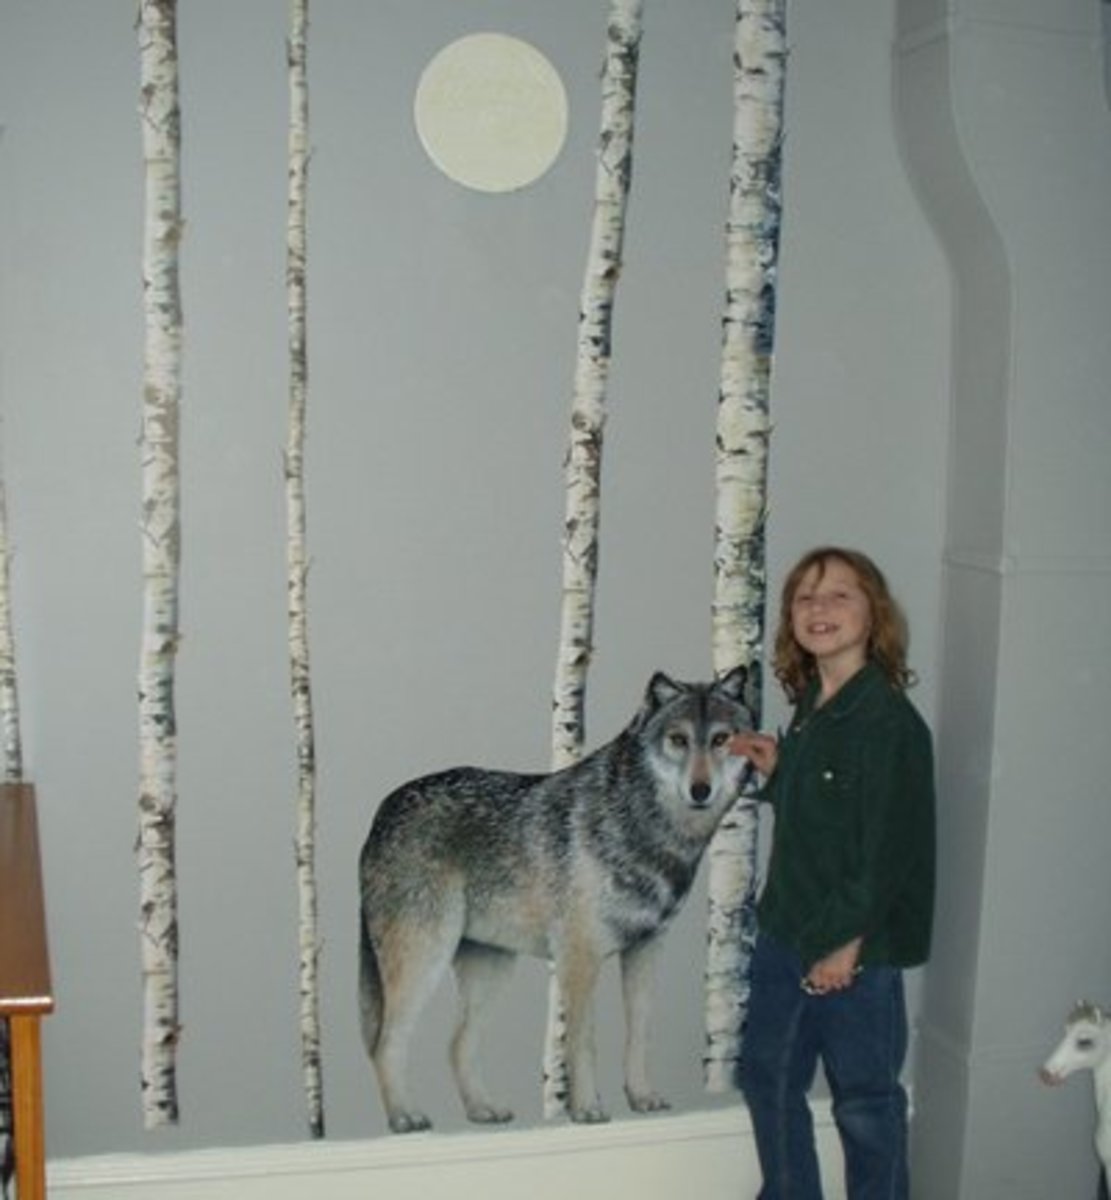 This life-sized wolf is really a wall mural. See how big he is and how real it looks? I think it would be scary to have a wolf in your room, but Lacey thinks he keeps her safe.